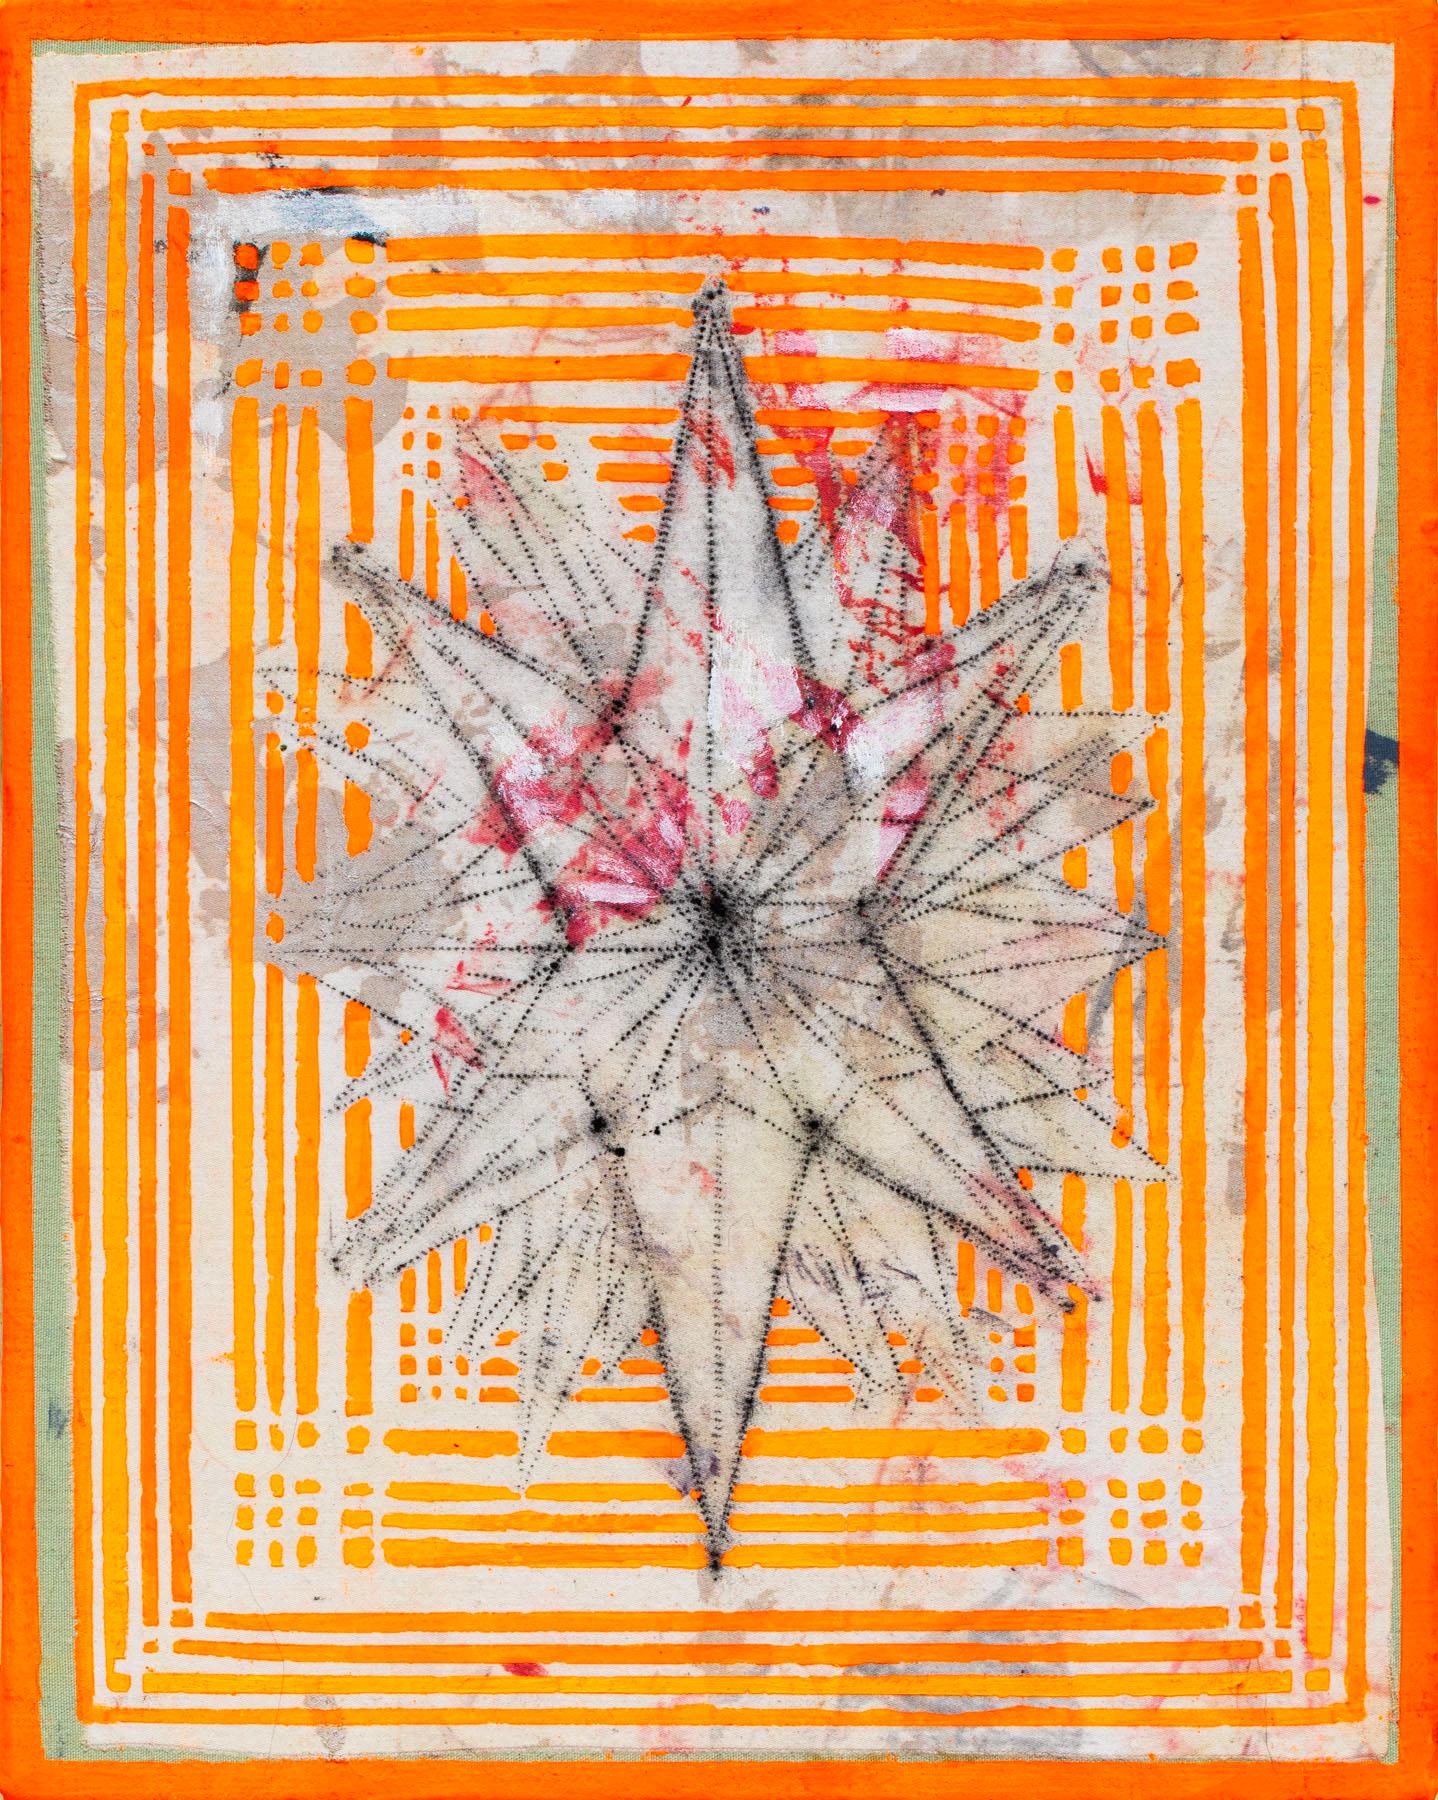 Jim Denney Figurative Painting - Star Structure, geometric abstract painting, bright neon orange